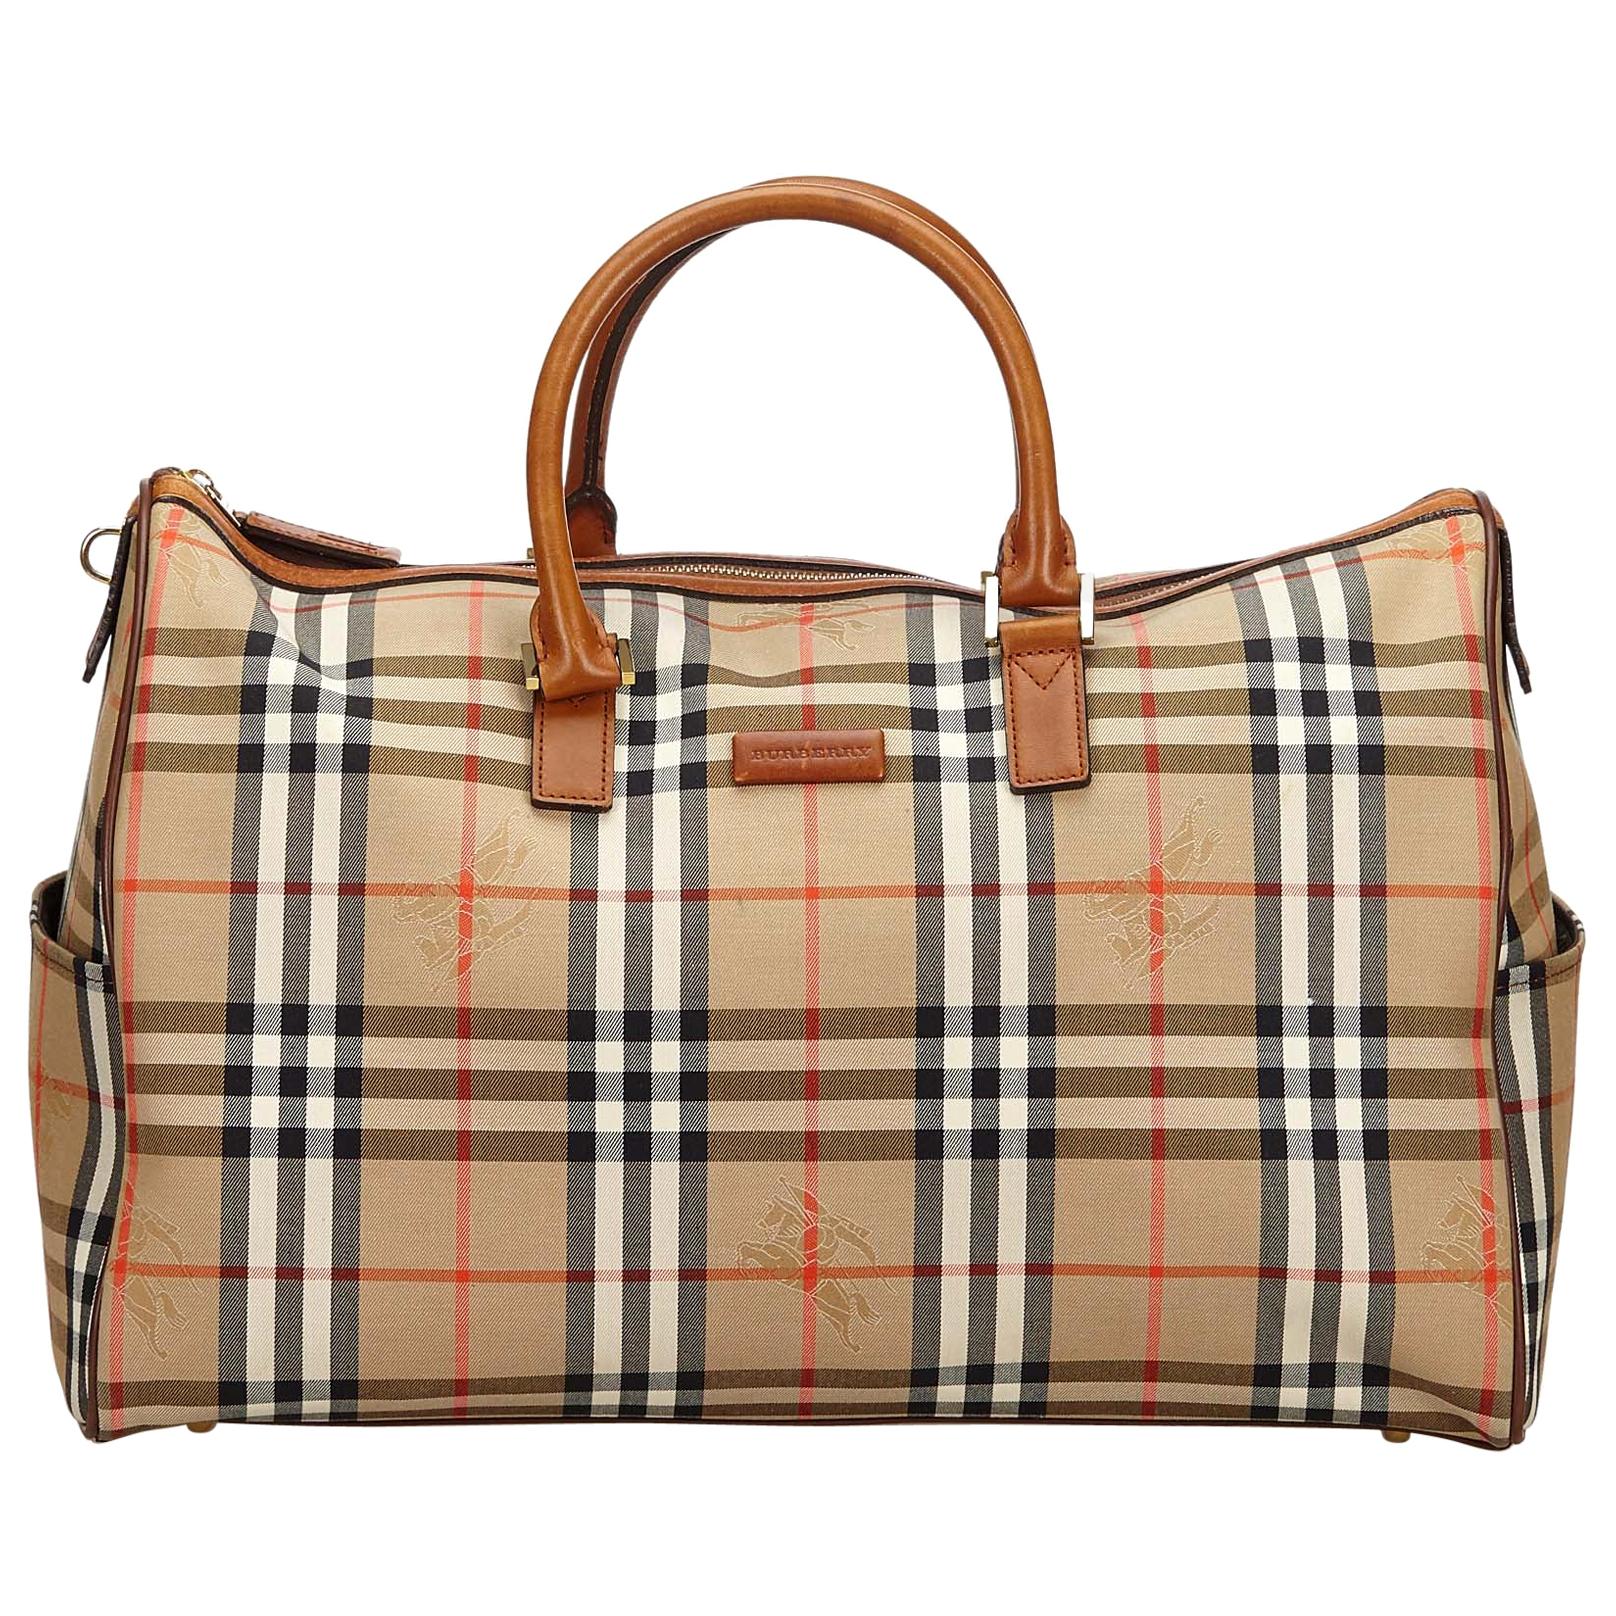 Burberry, Bags, Selling Preloved Authentic Vintage Burberry Travel Bag